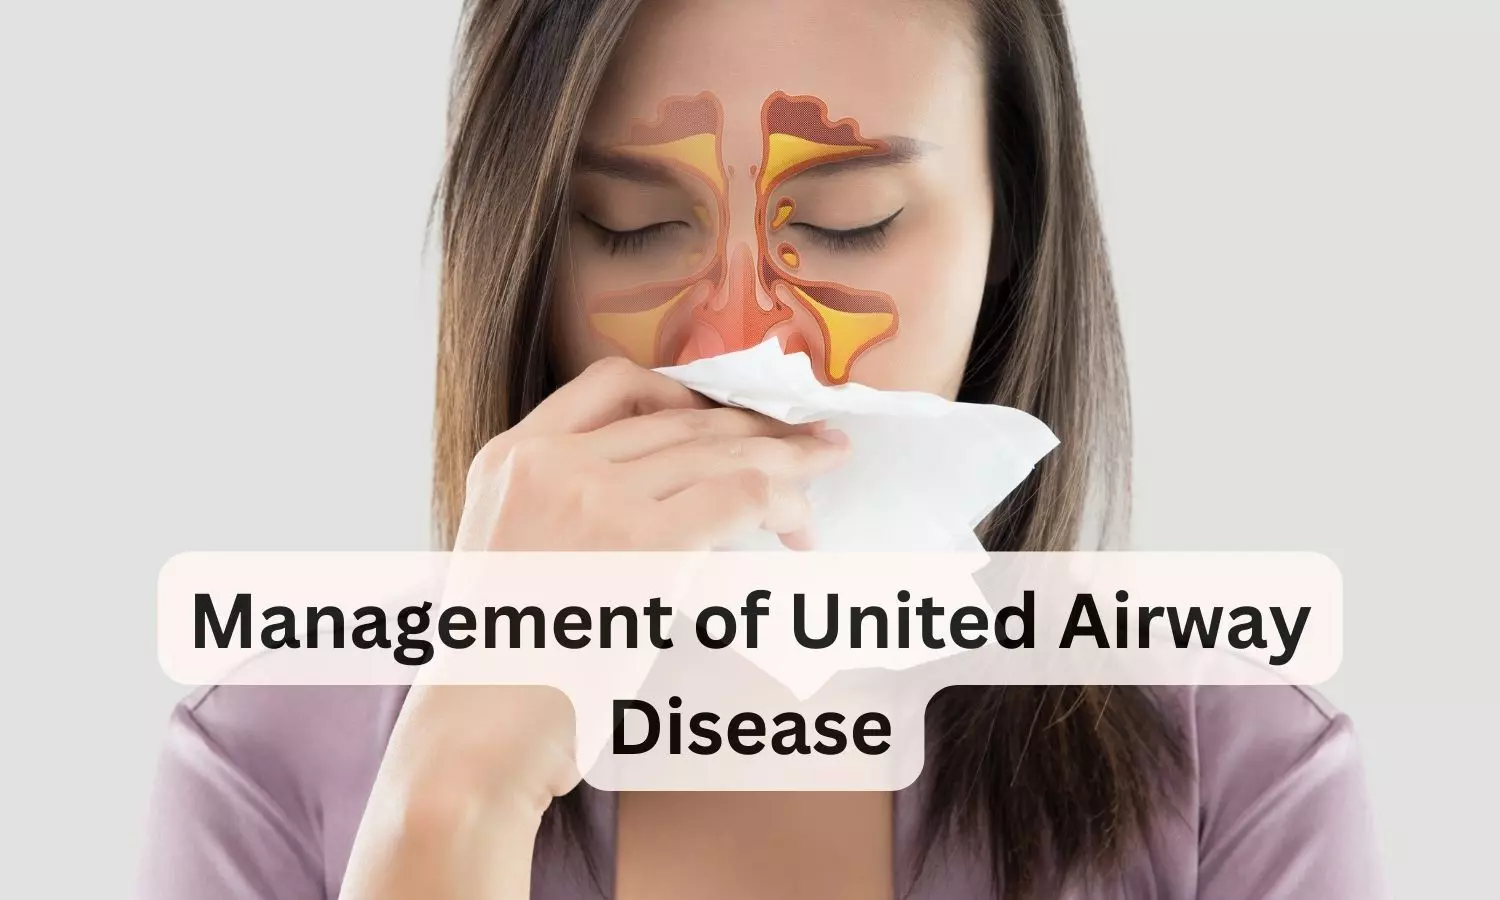 United Airway Disease and Clinical Applicability of Montelukast Fexofenadine Combination: Review